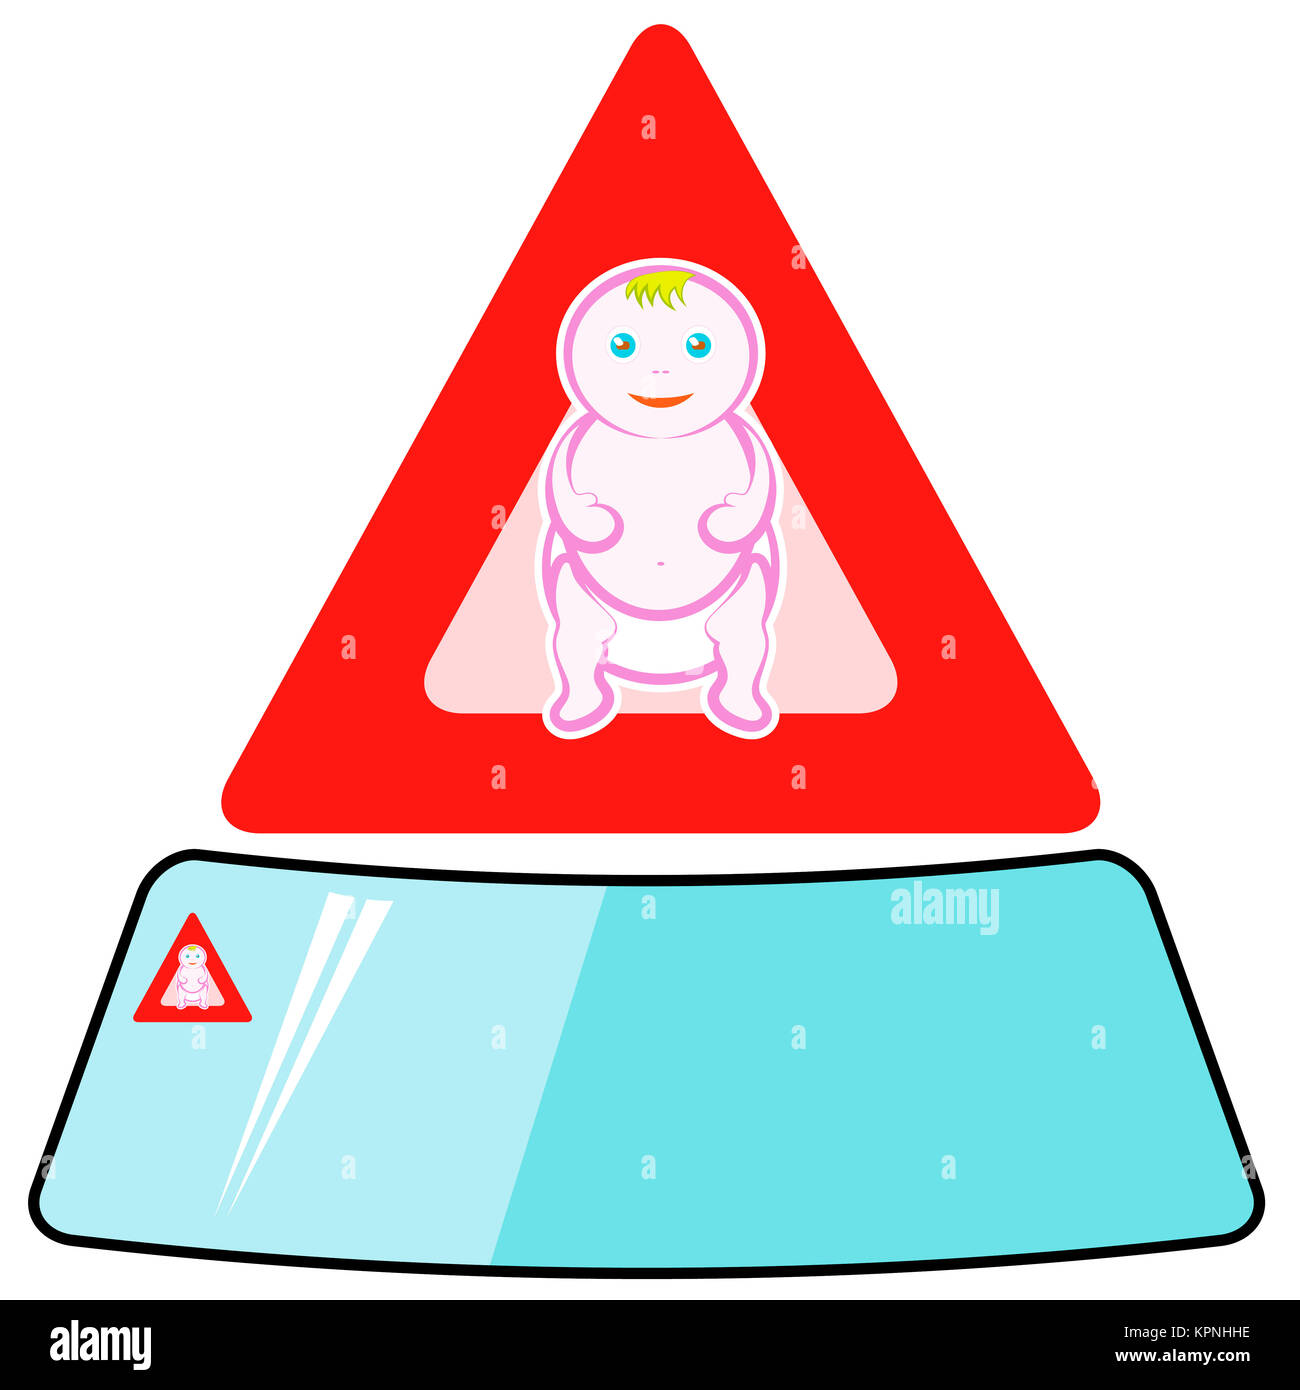 Baby on board sign hi-res stock photography and images - Alamy